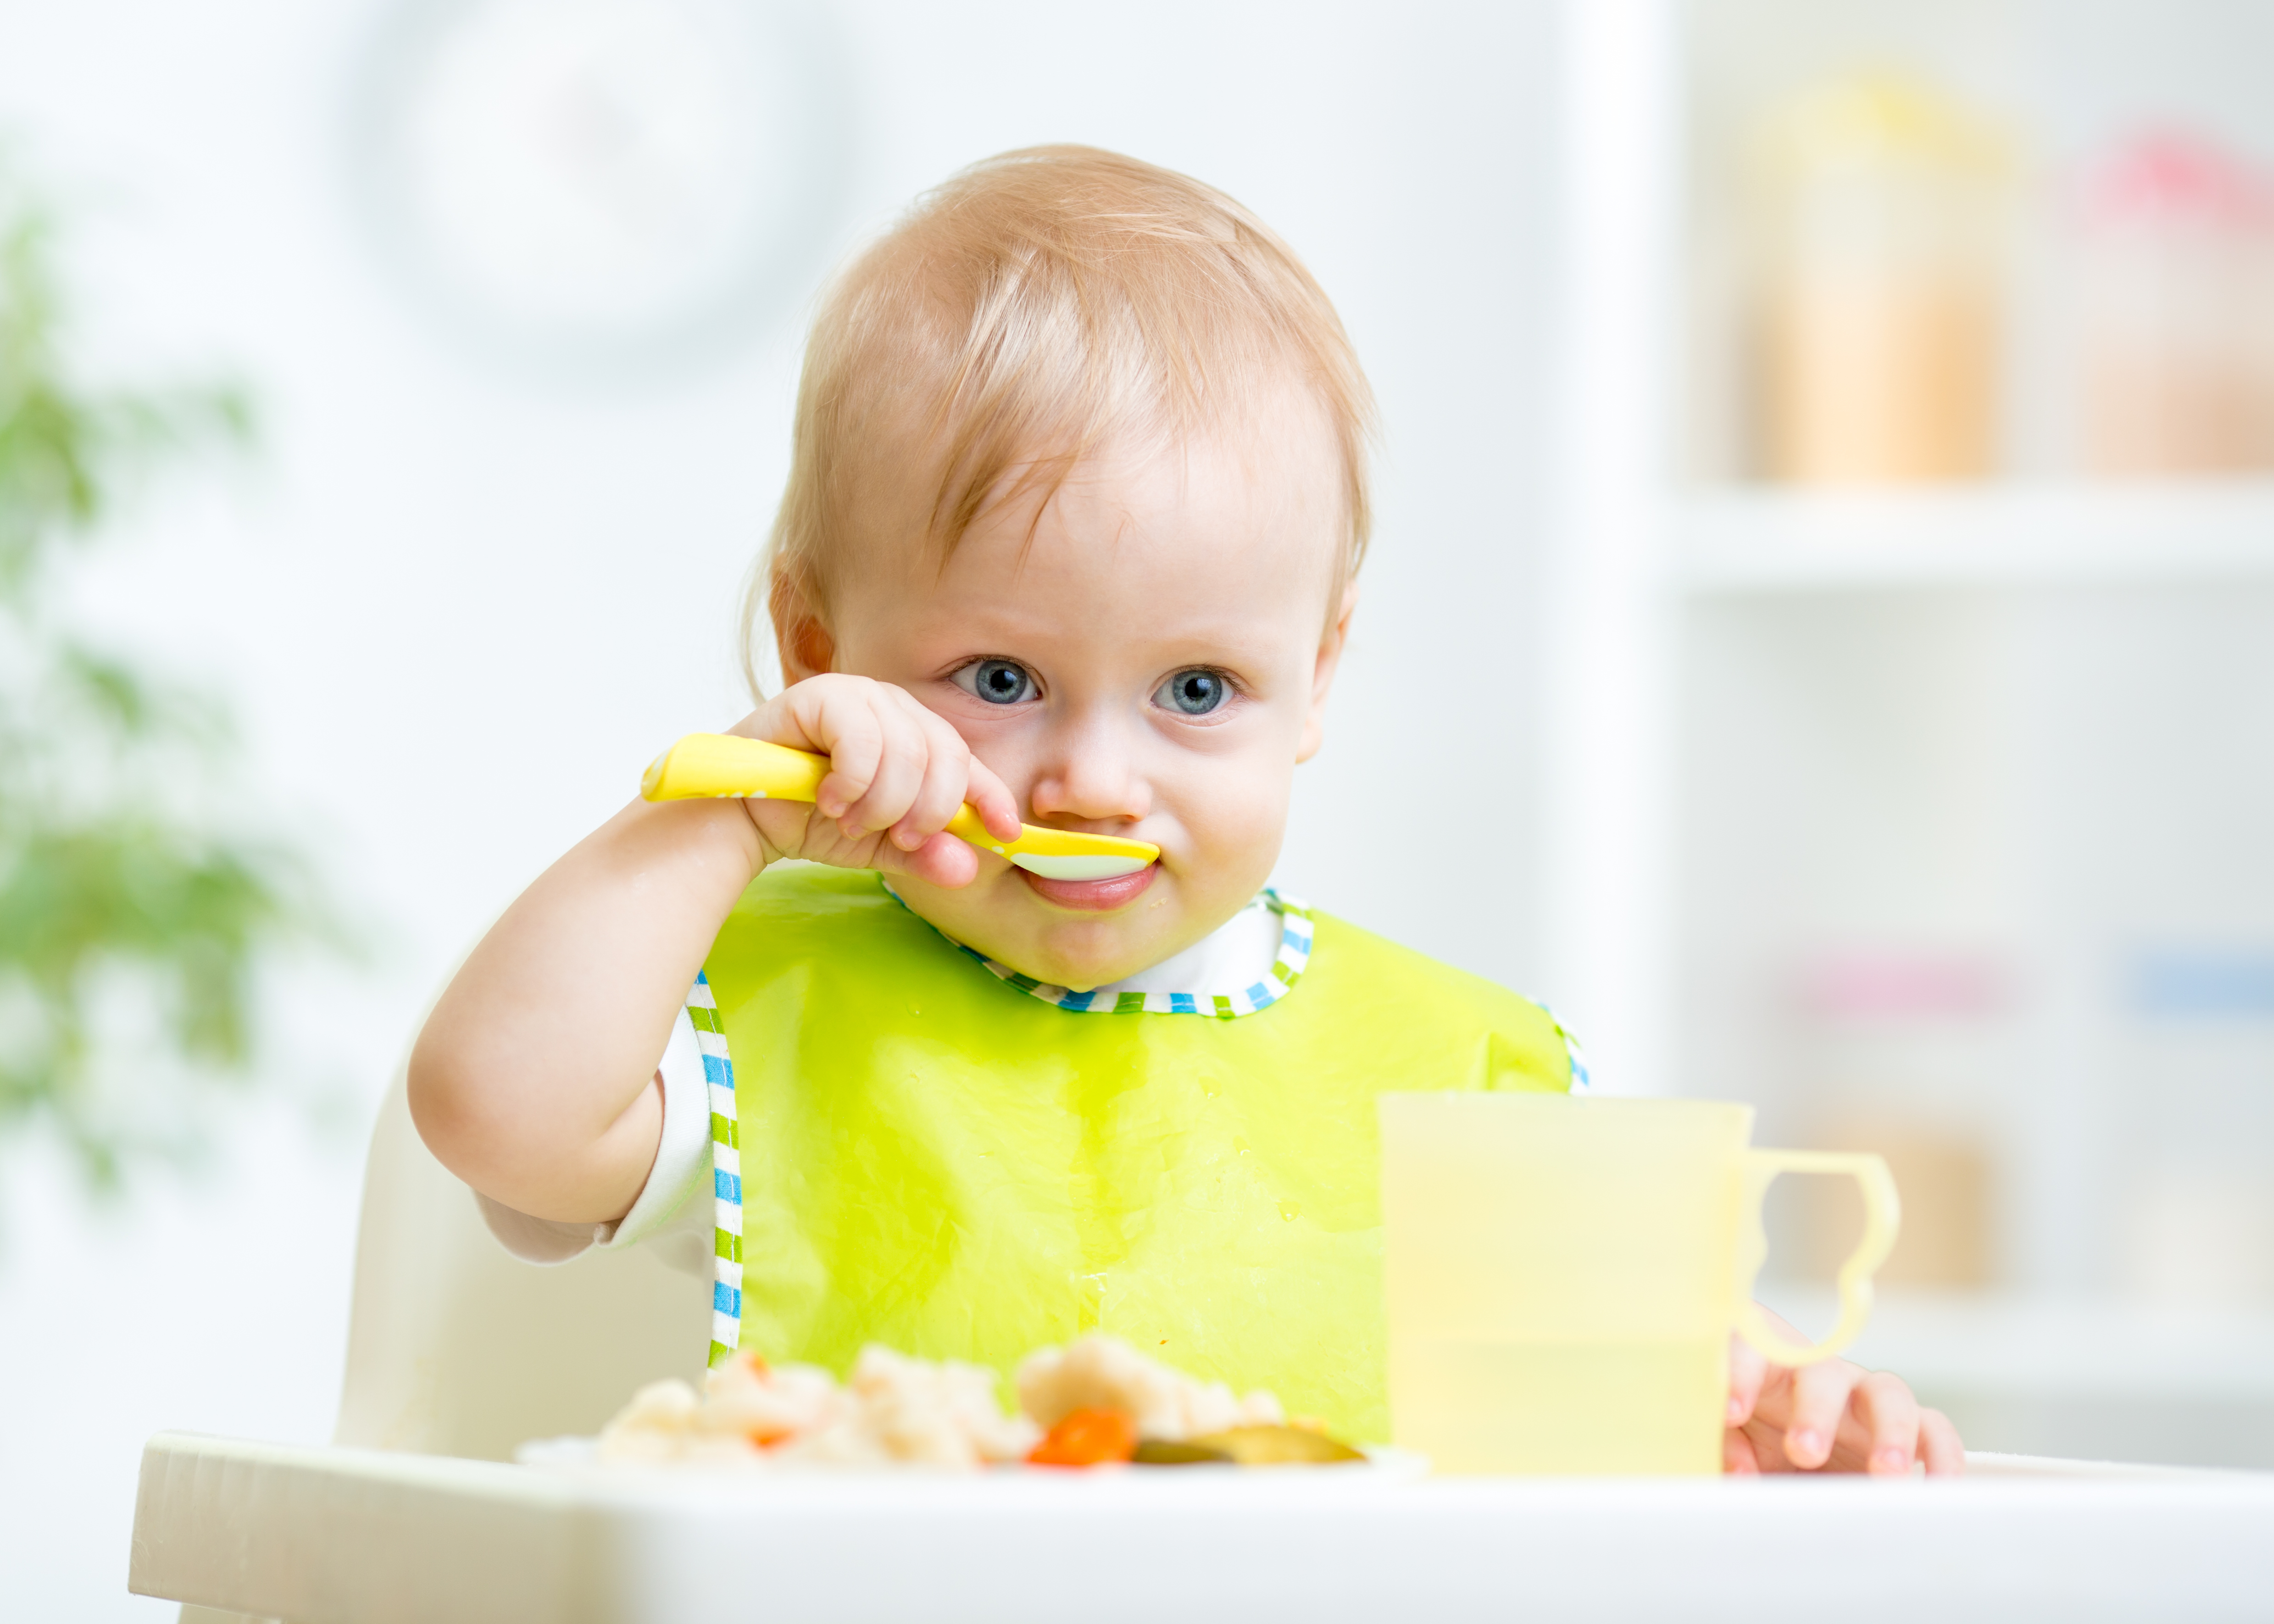 Introduction of vegetables, fruits and berries into the child's diet